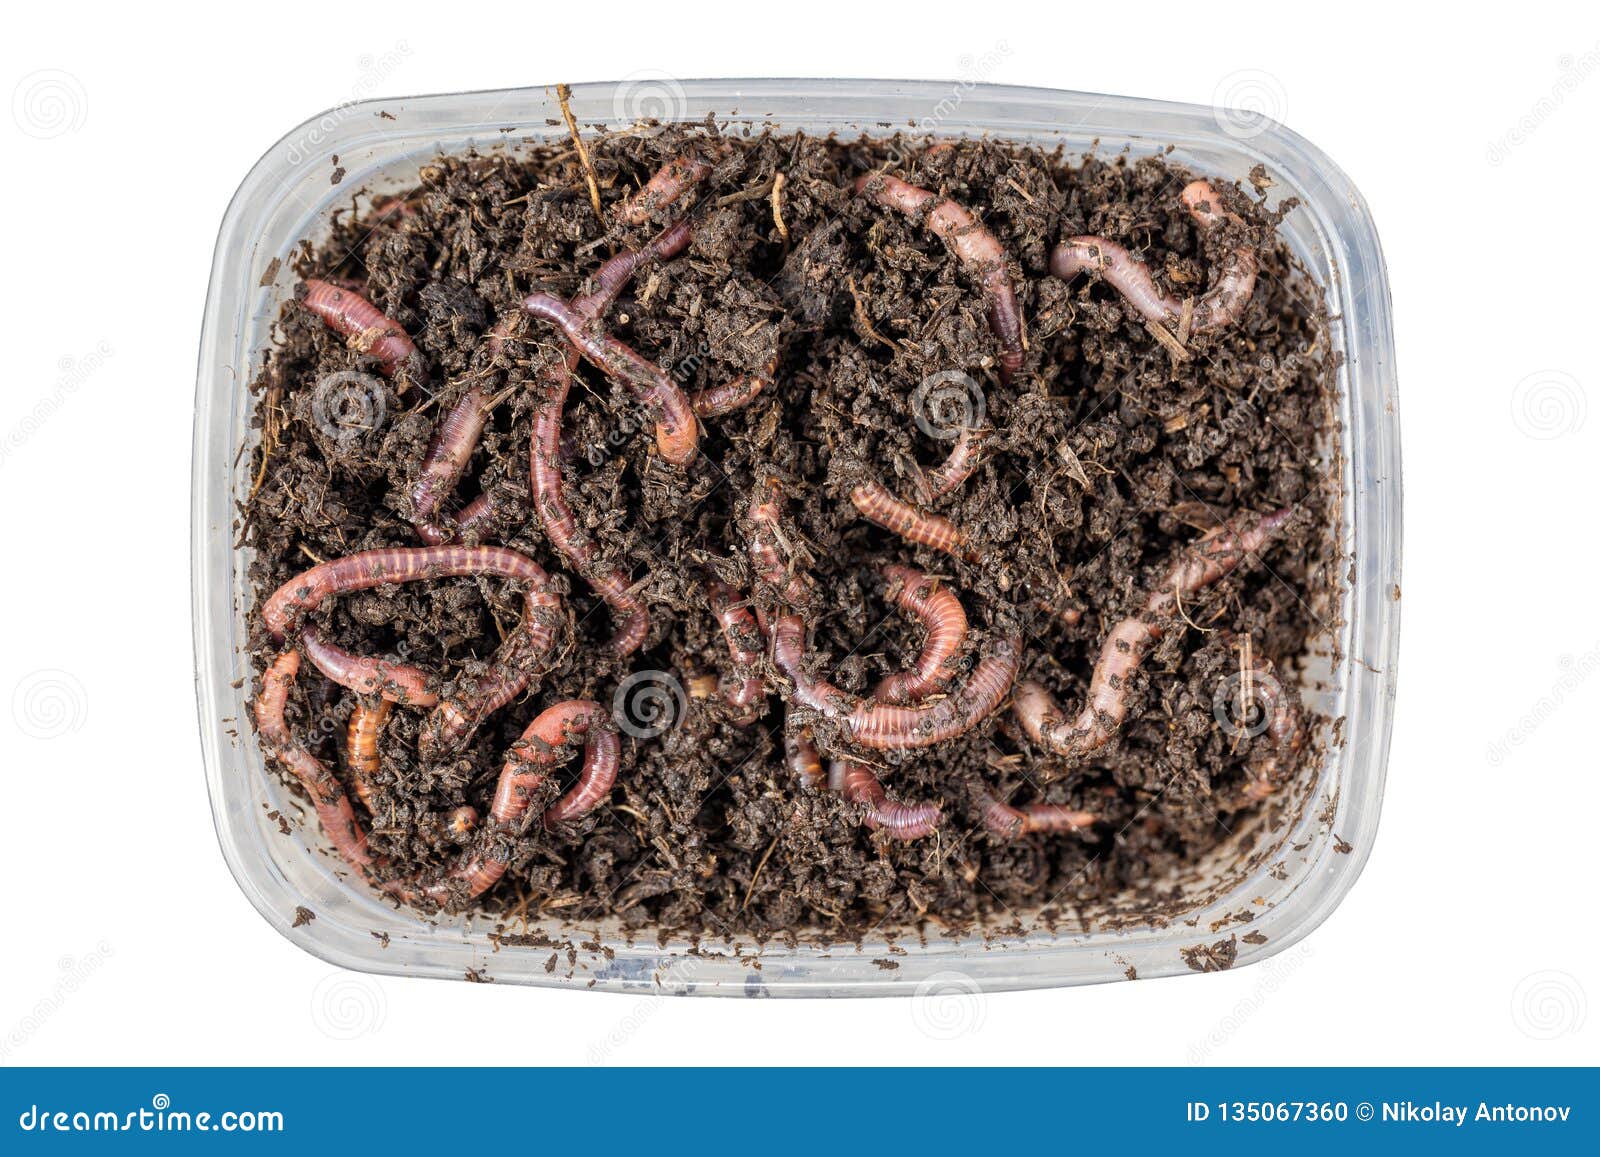 Red Worms Dendrobena in a Box in Manure, Earthworm Live Bait for